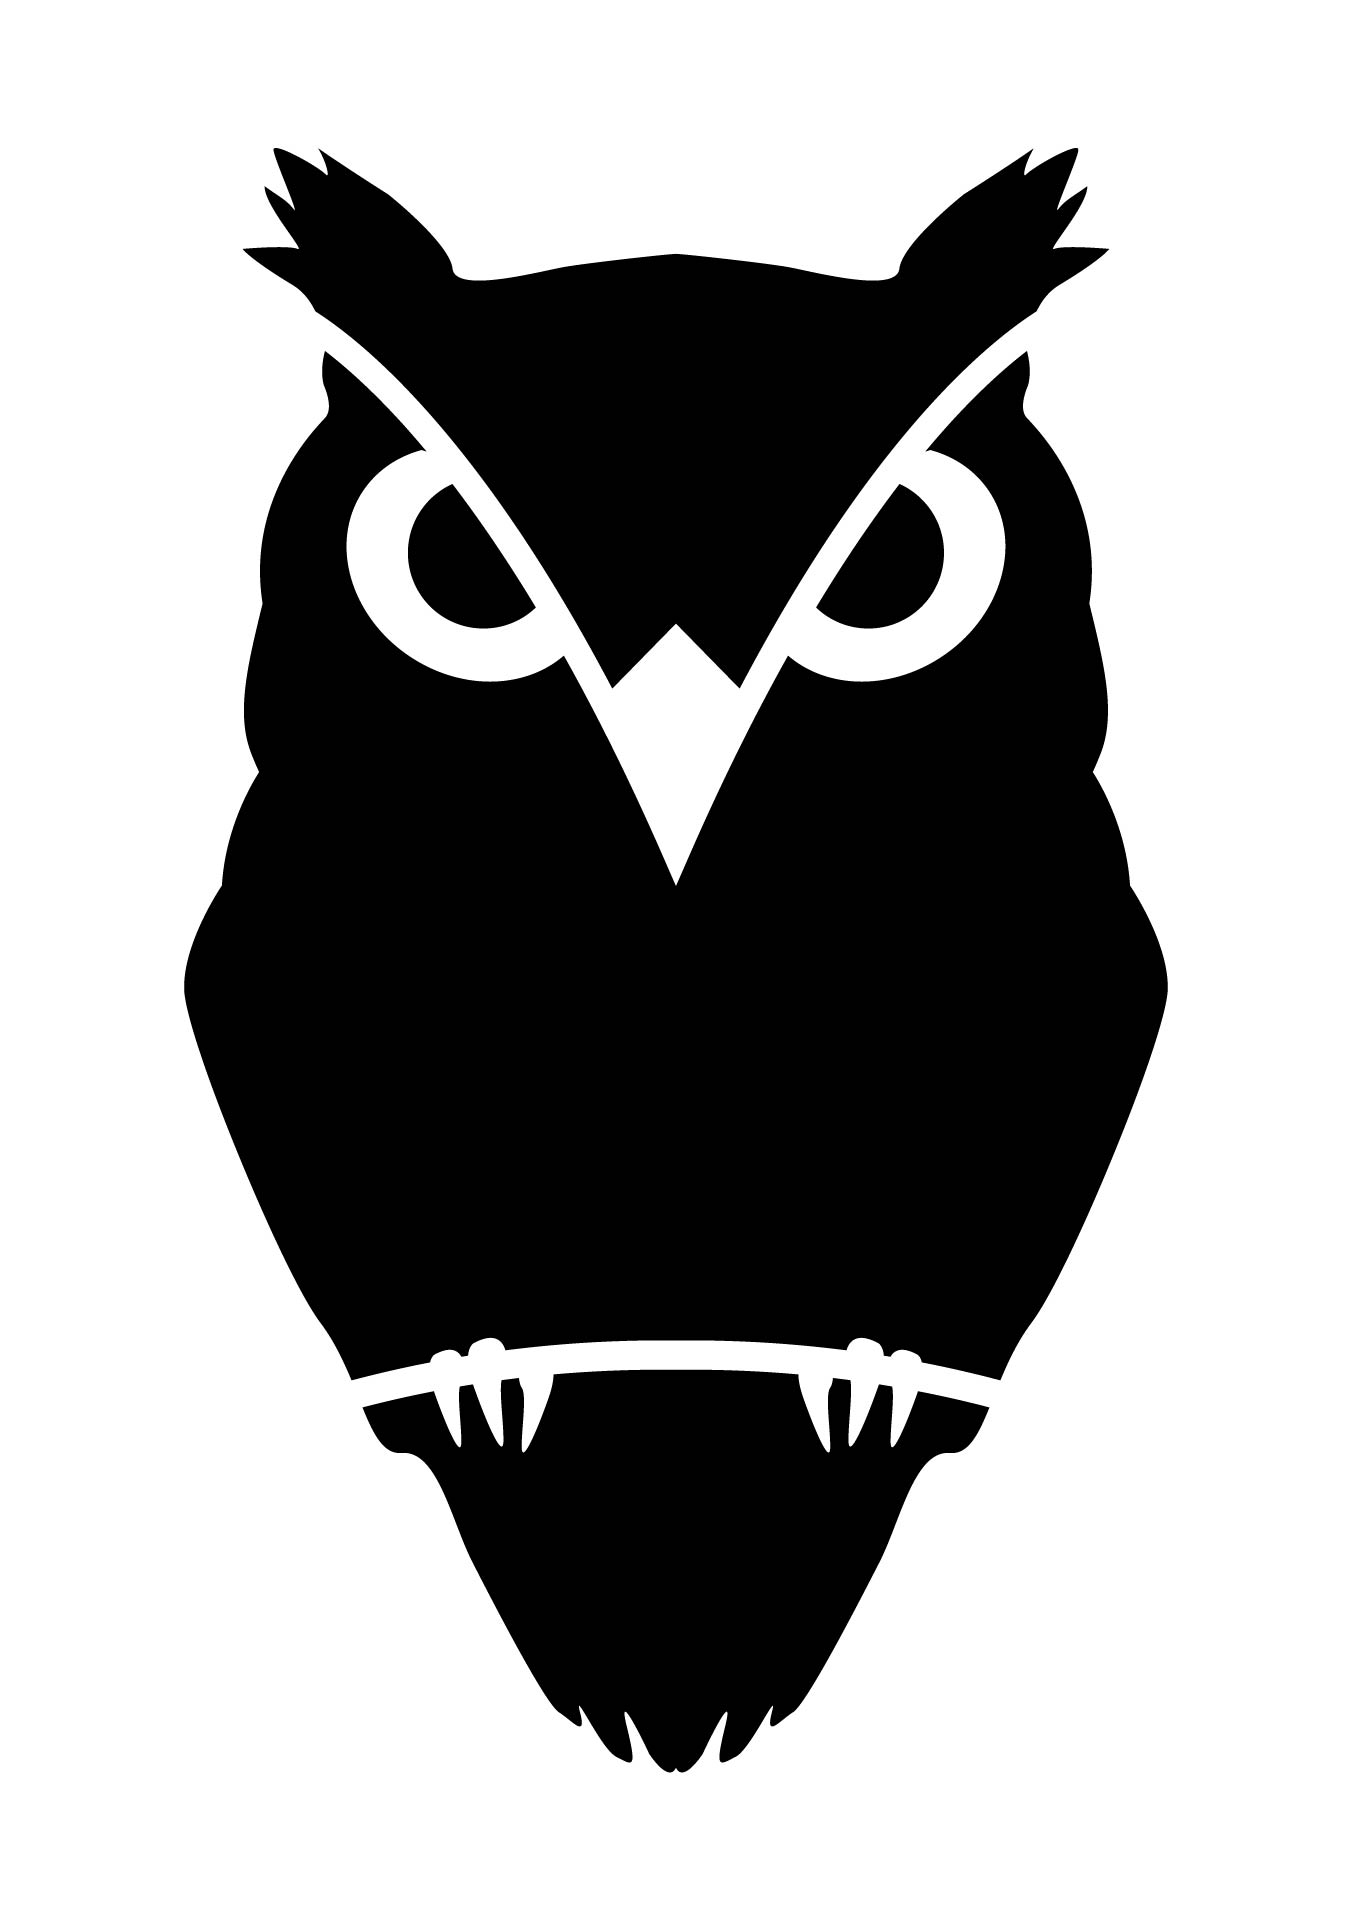 4-best-images-of-free-printable-owl-pumpkin-carving-stencil-owl